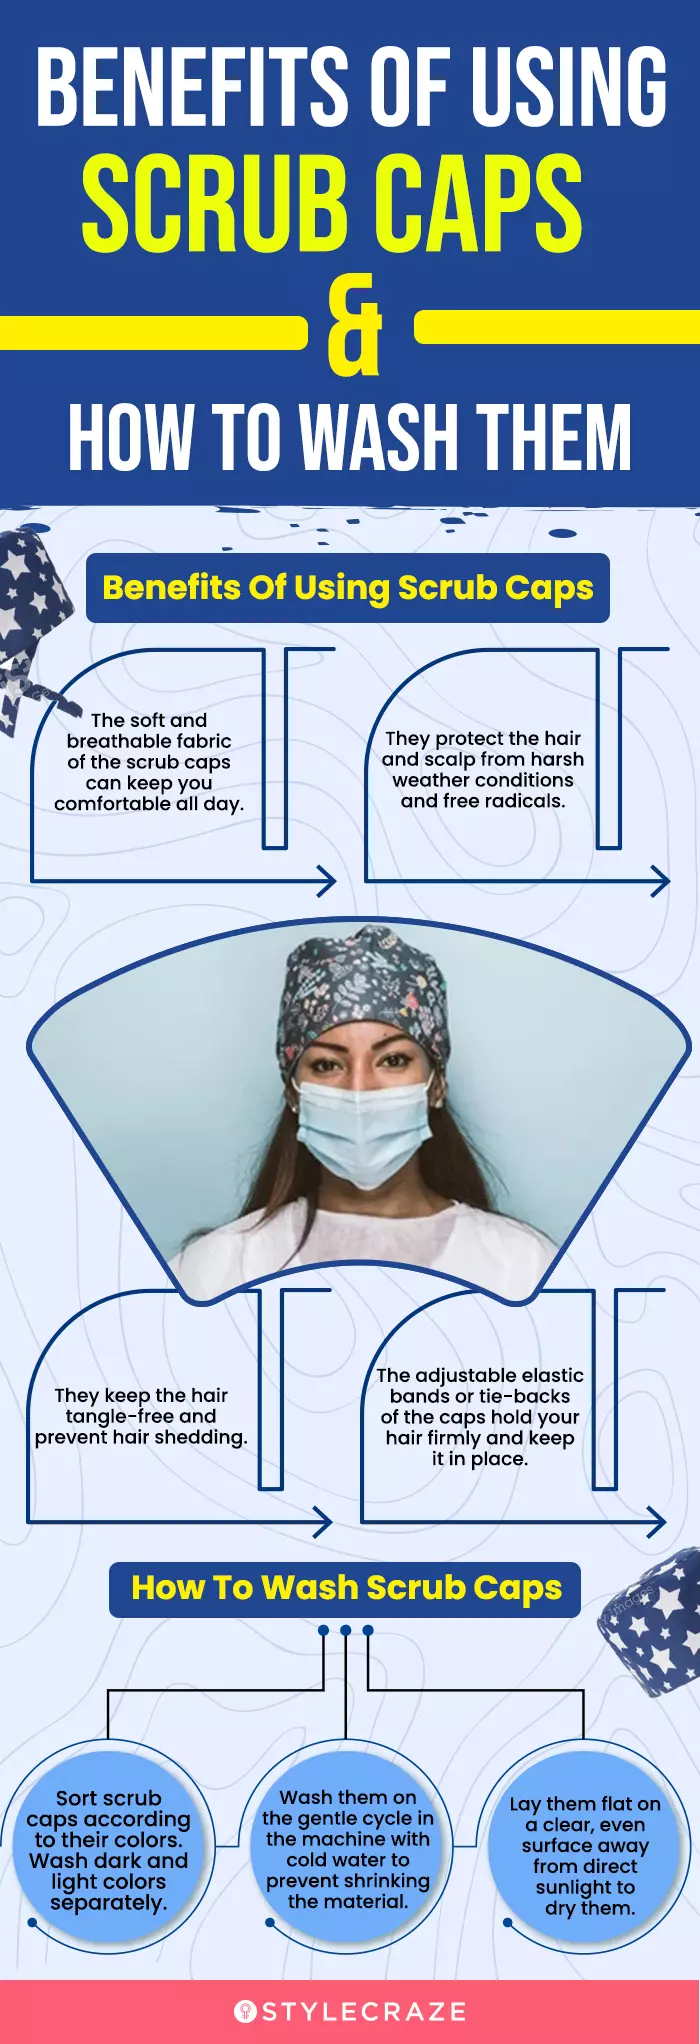 Benefits Of Using Scrub Caps & How To Wash Them (infographic)